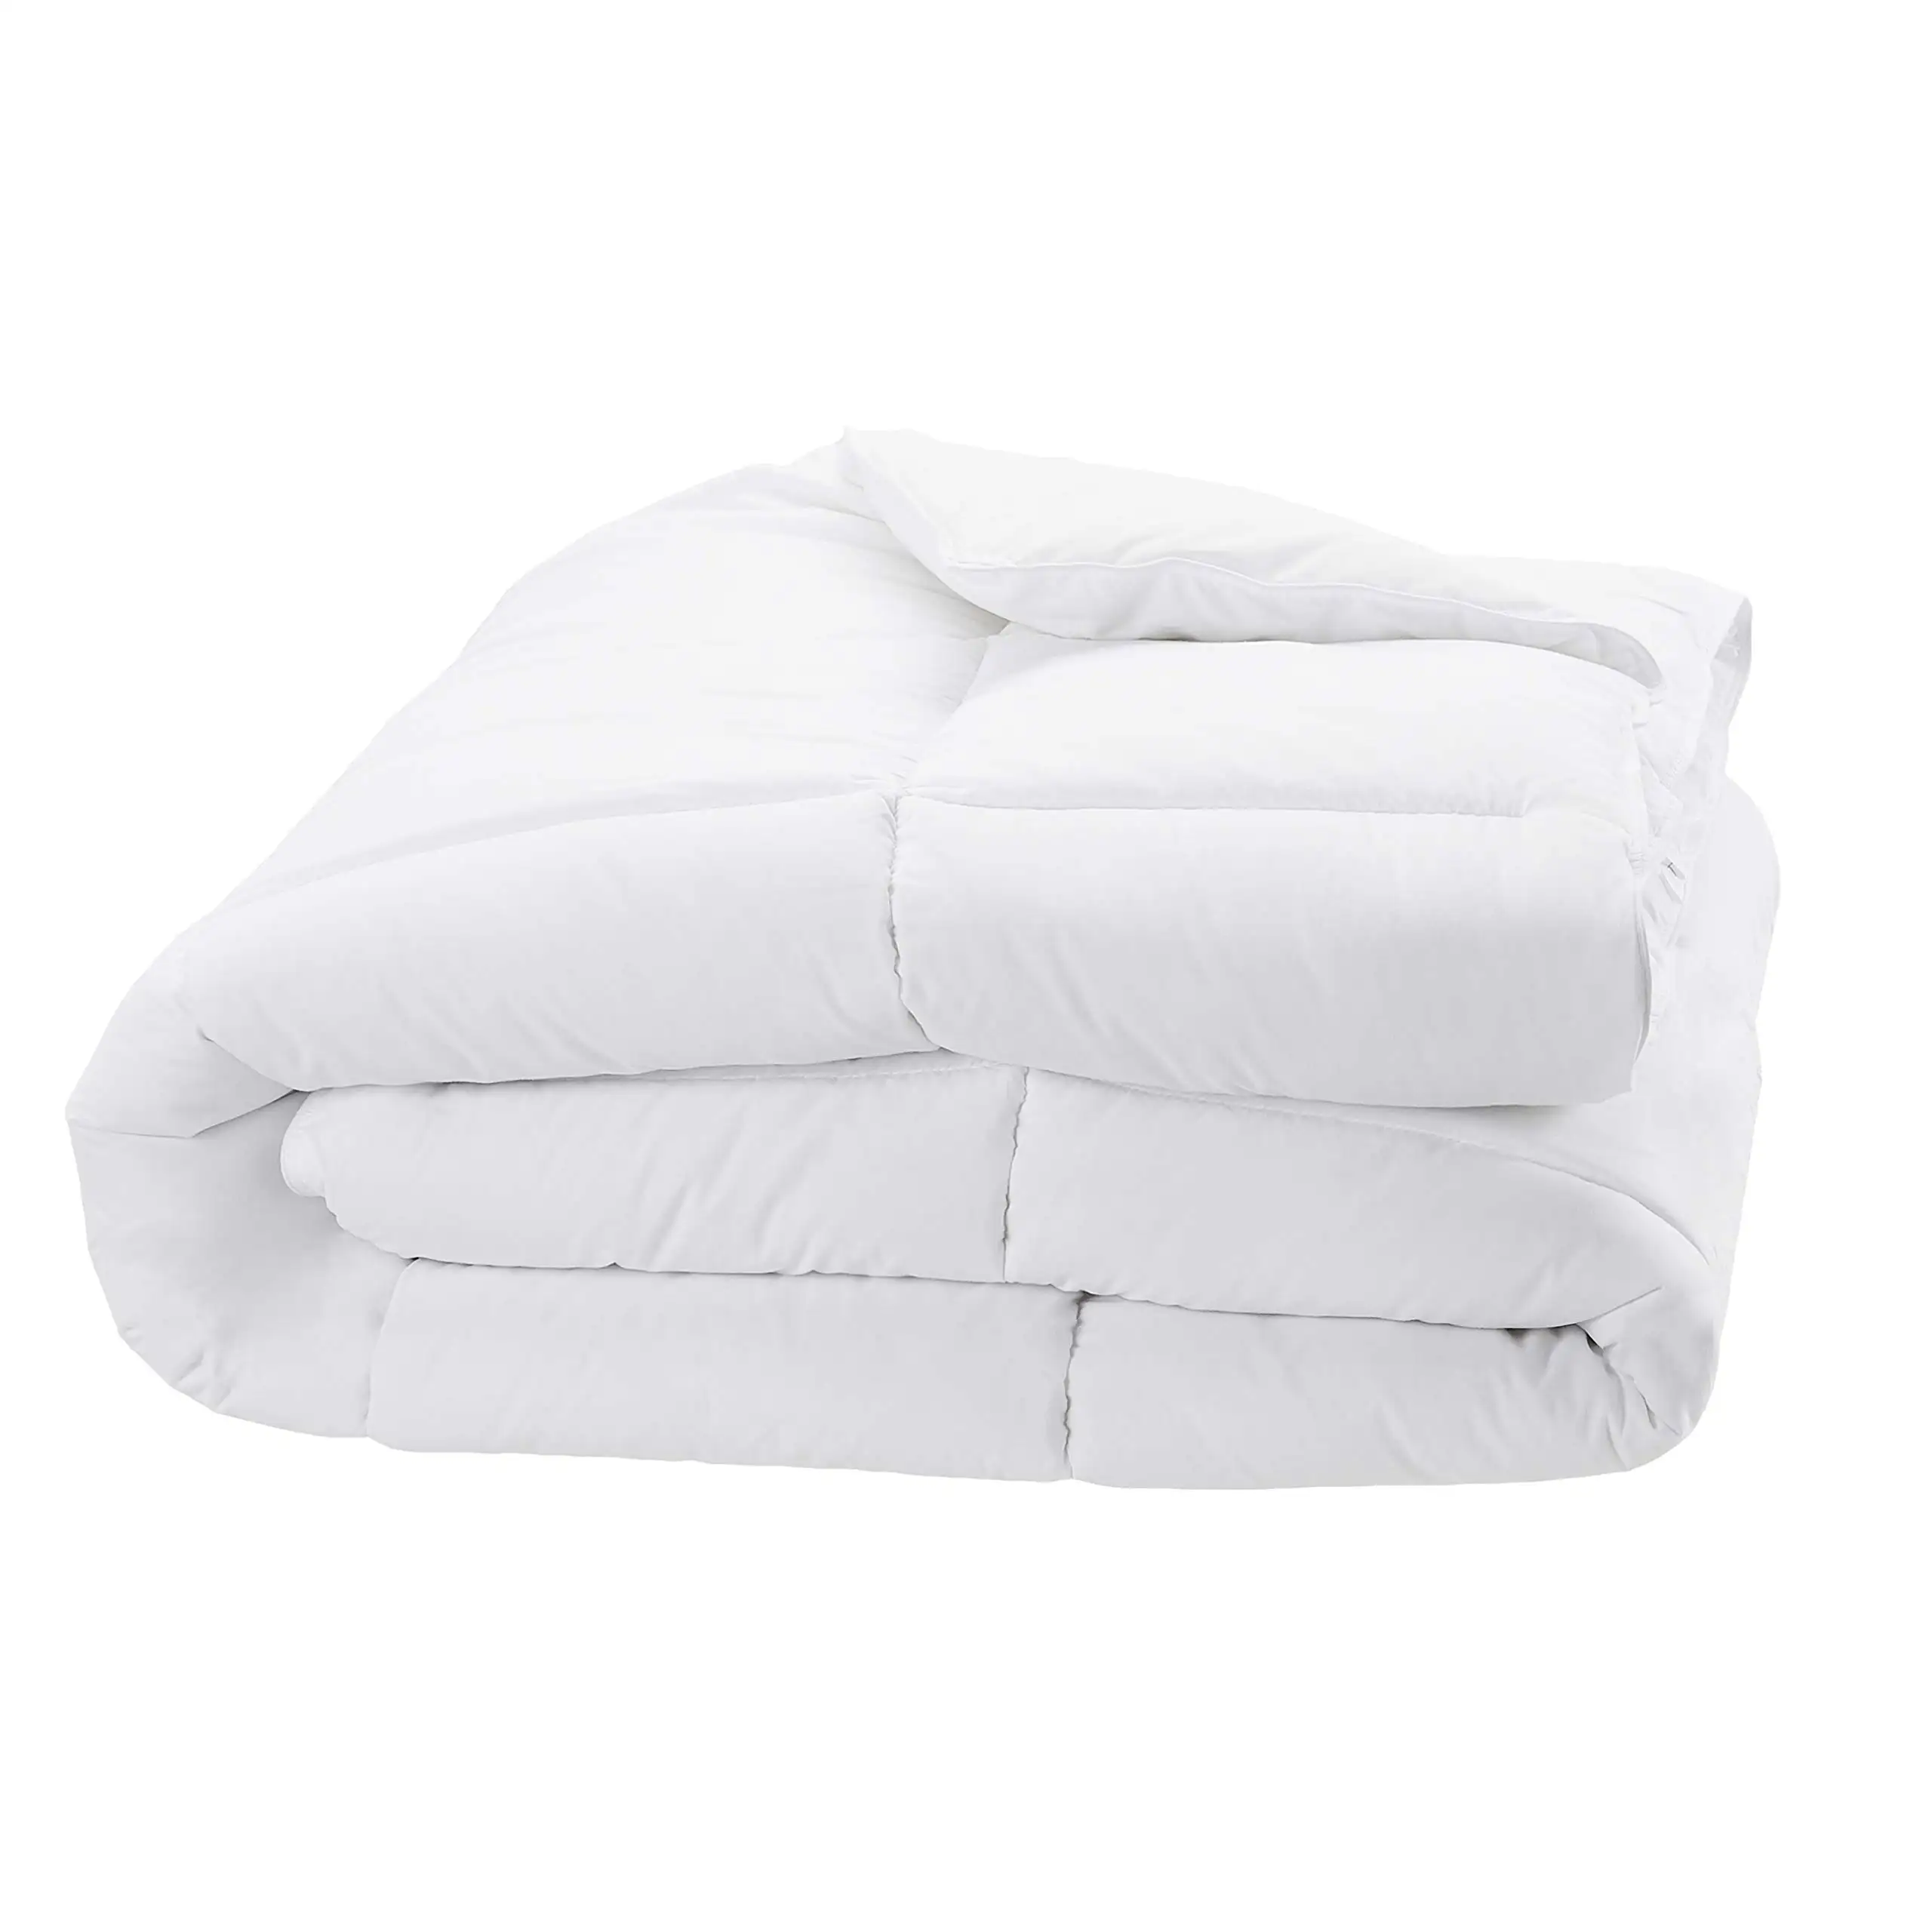 Durable high quality polyester warm bedding down alternative bed comforter or duvet insert